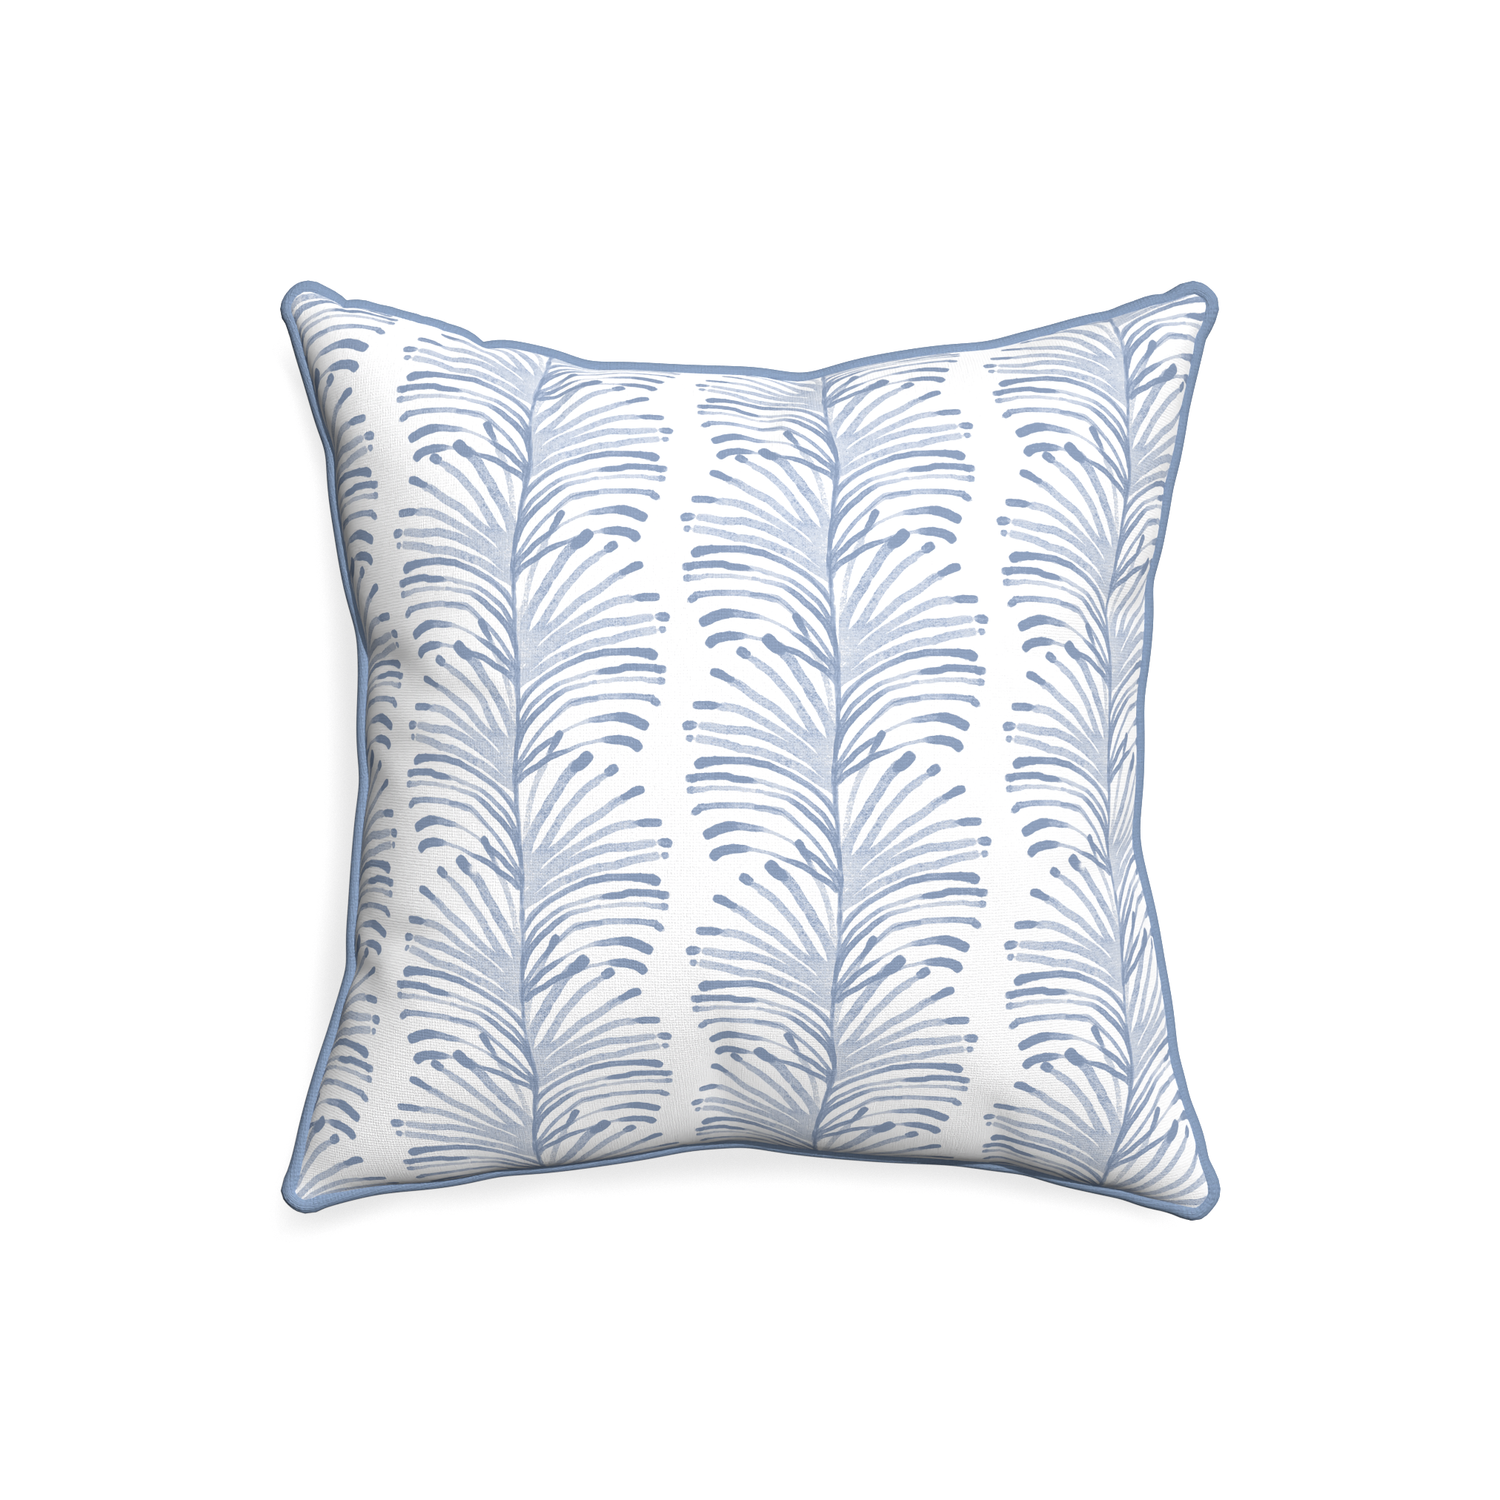 20-square emma sky custom sky blue botanical stripepillow with sky piping on white background